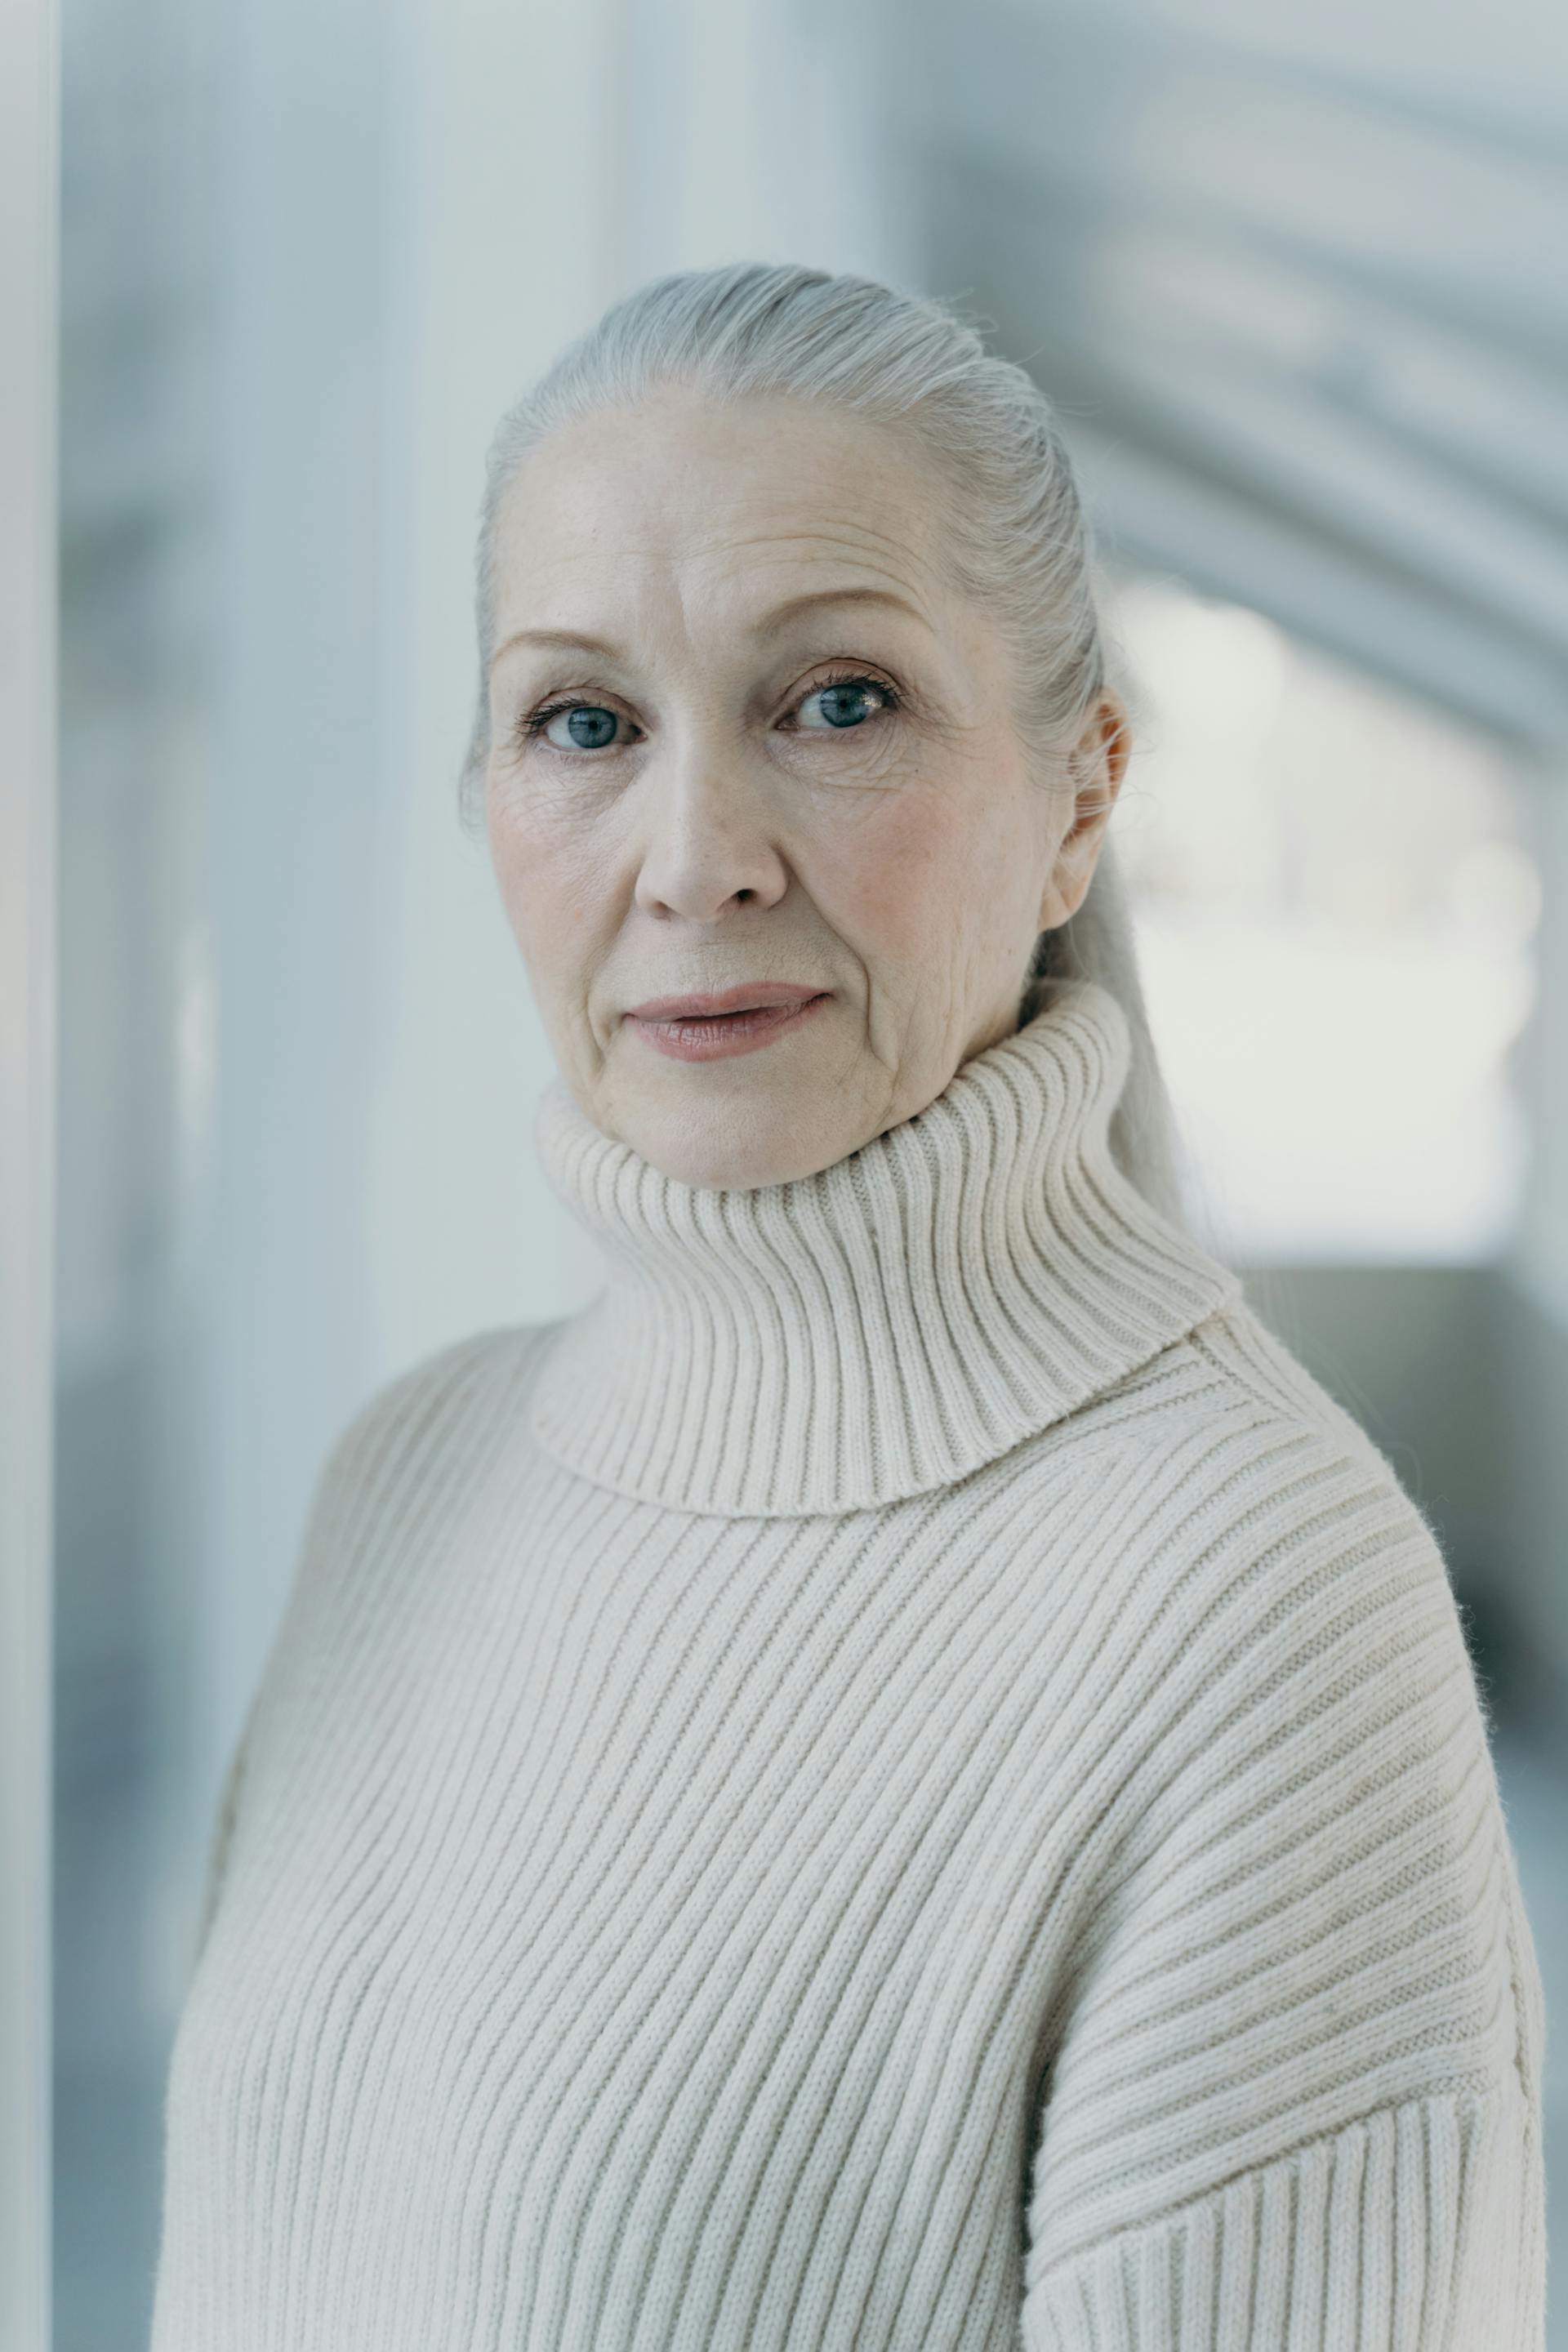 The truth behind Carol's deed relieves the family, especially Agnes | Source: Pexels